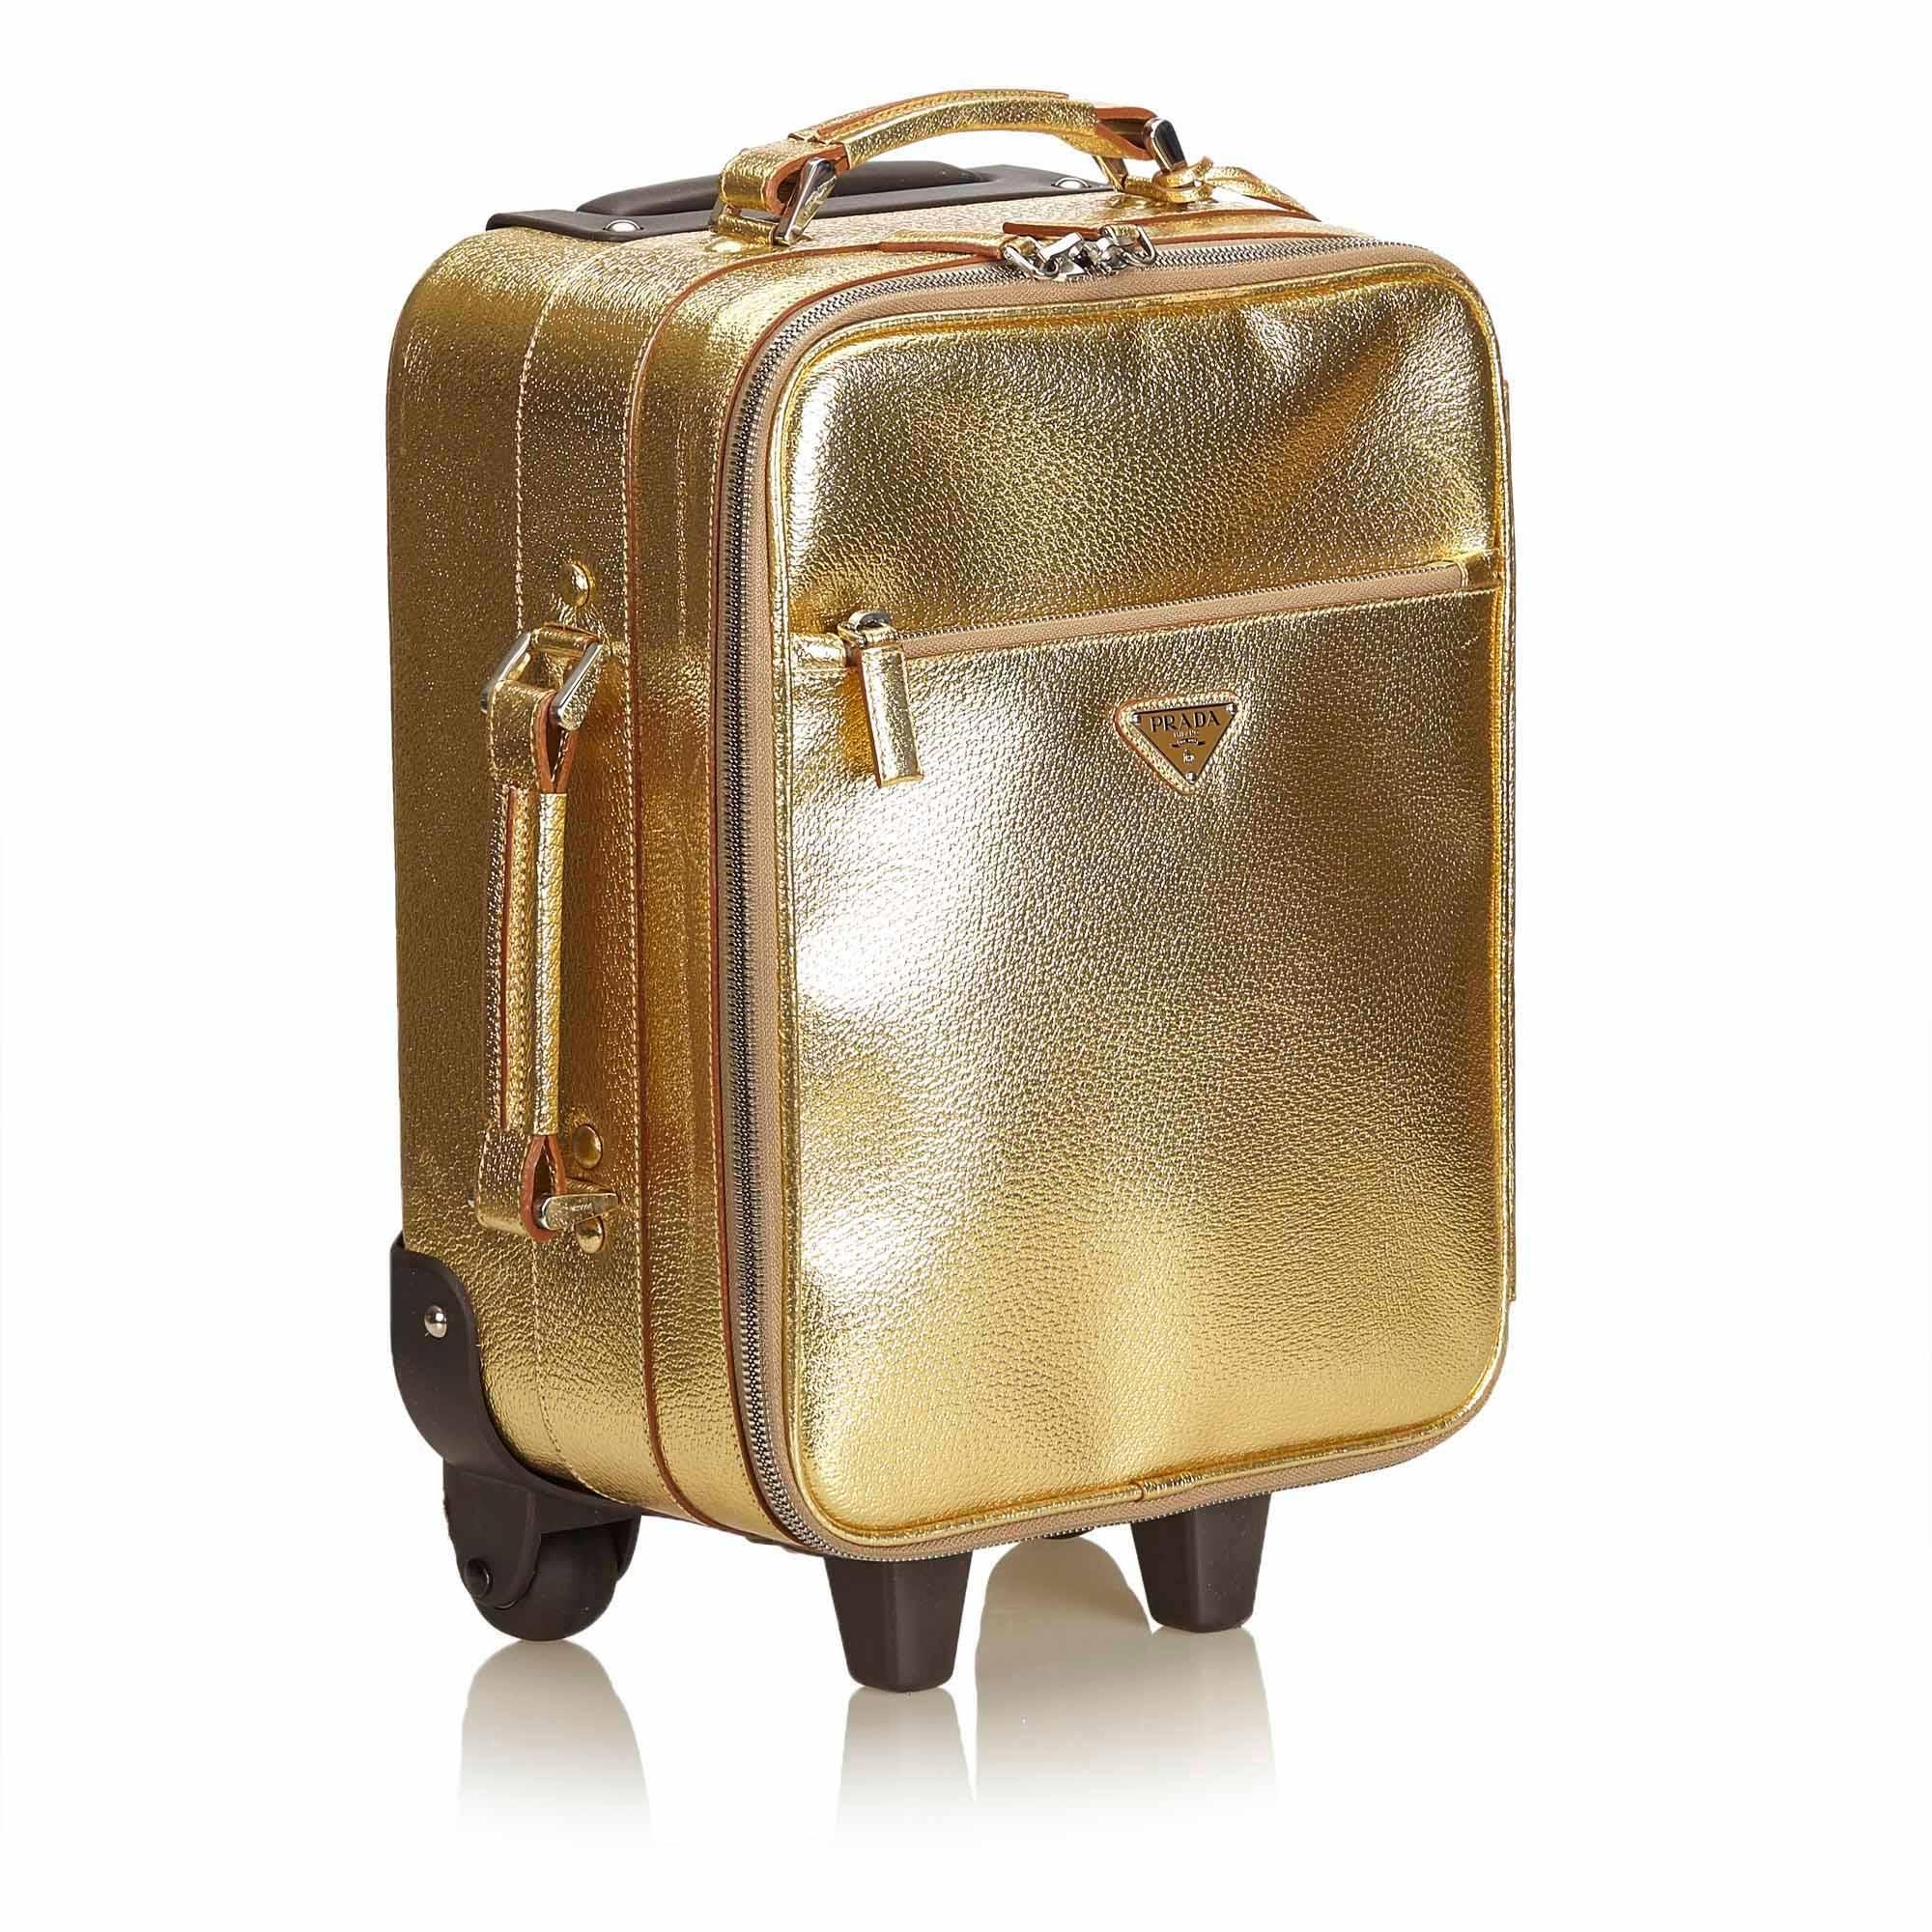 This travel bag features a leather body, zip-around closure, flat handle, elongated handle, exterior zip pocket, and an interior zip pocket. It carries as AB condition rating.

Inclusions: 
Dust Bag
Authenticity Card

Dimensions:
Length: 42.00